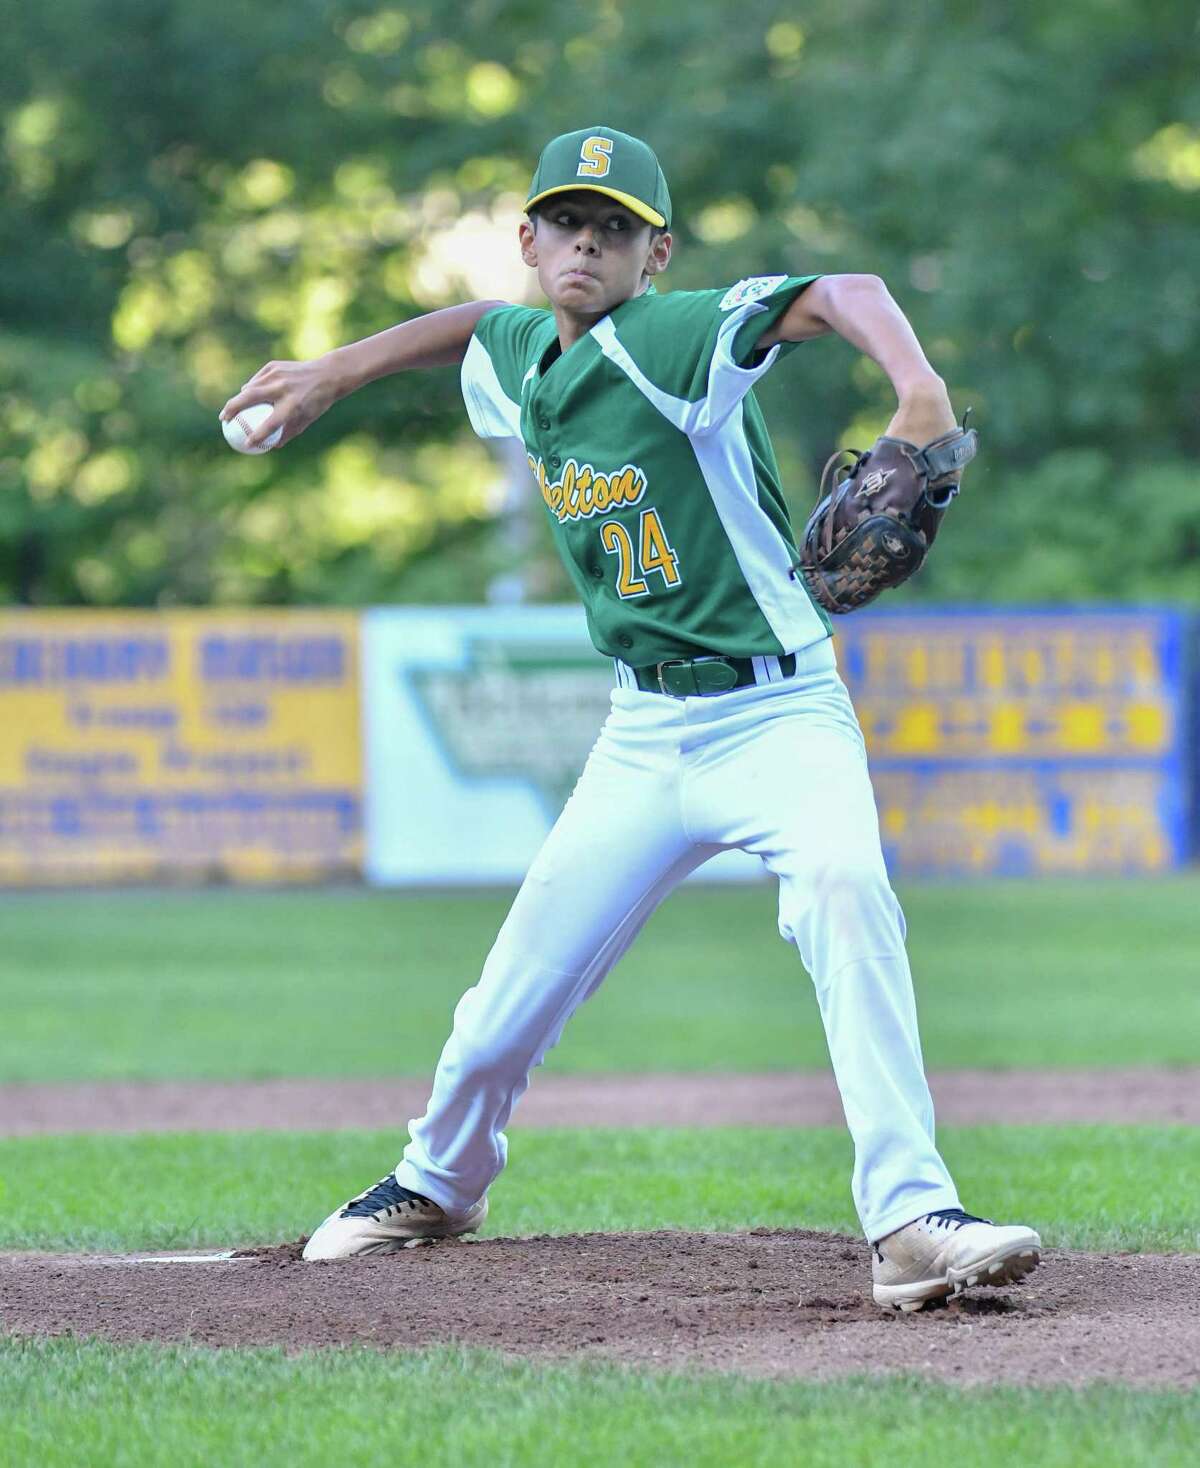 Nicolas Piscioniere (24) of Shelton American delivers a pitch during a Section 2 Little League playoff game against Wallingford on Thusday July 19, 2018, at Peter J. Foley Field in Naugatuck, Connecticut.